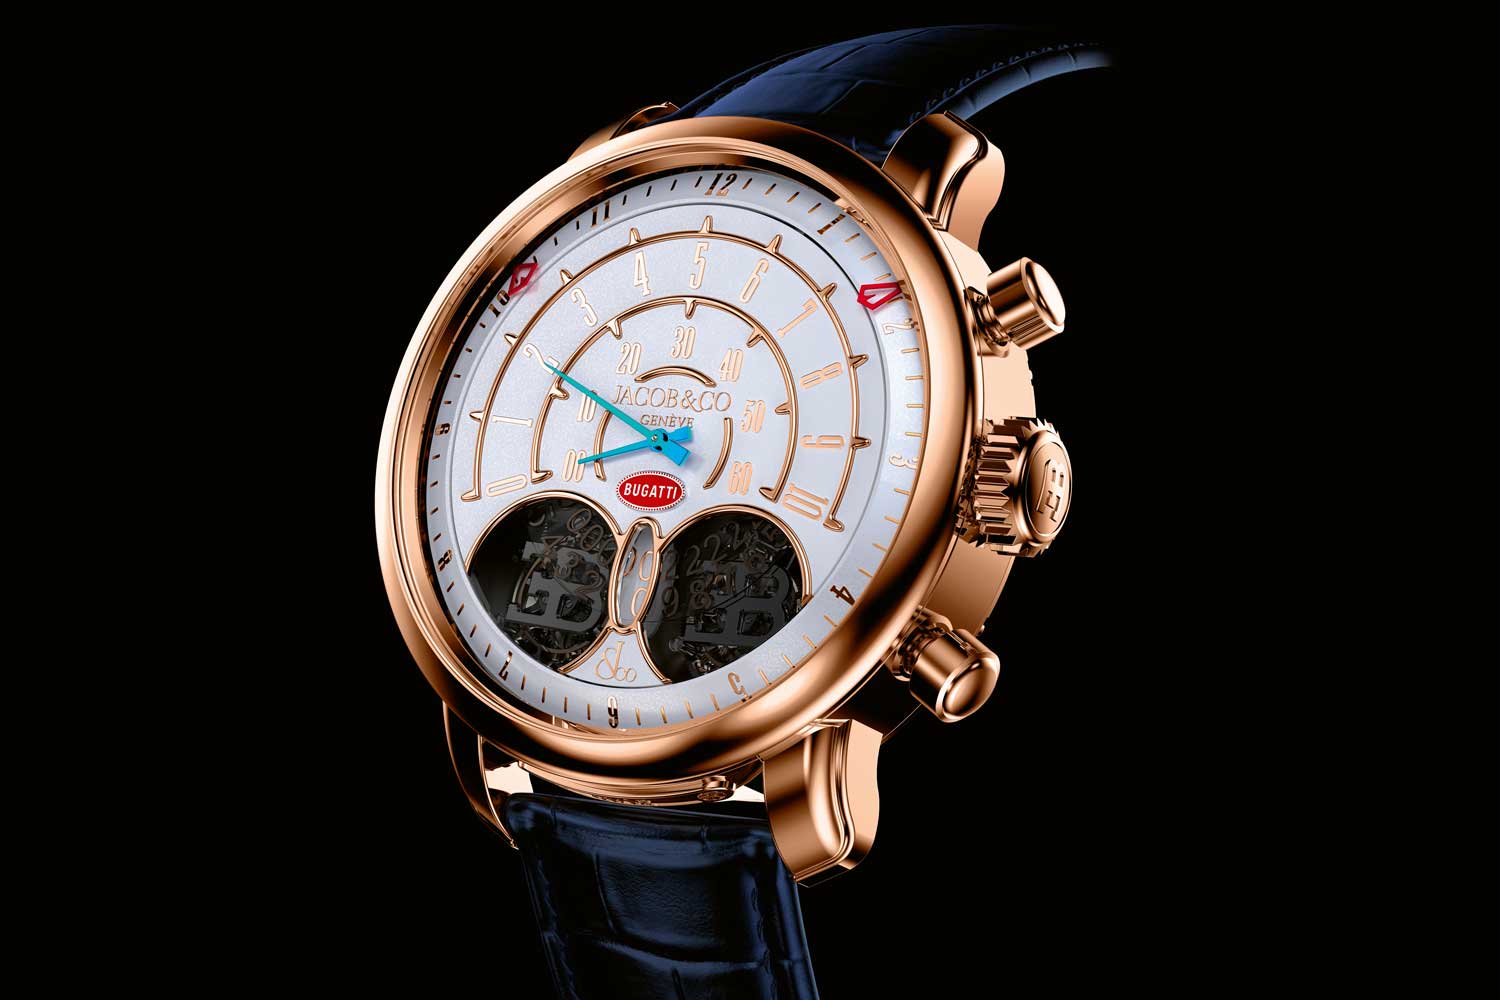 The Jacob & Co. Jean Bugatti features peripheral hours and minutes and a central bi-retrograde chronograph display that measures the seconds in units and tens, along with an aperture at six o’clock that displays the elapsed minutes on a jumping disc